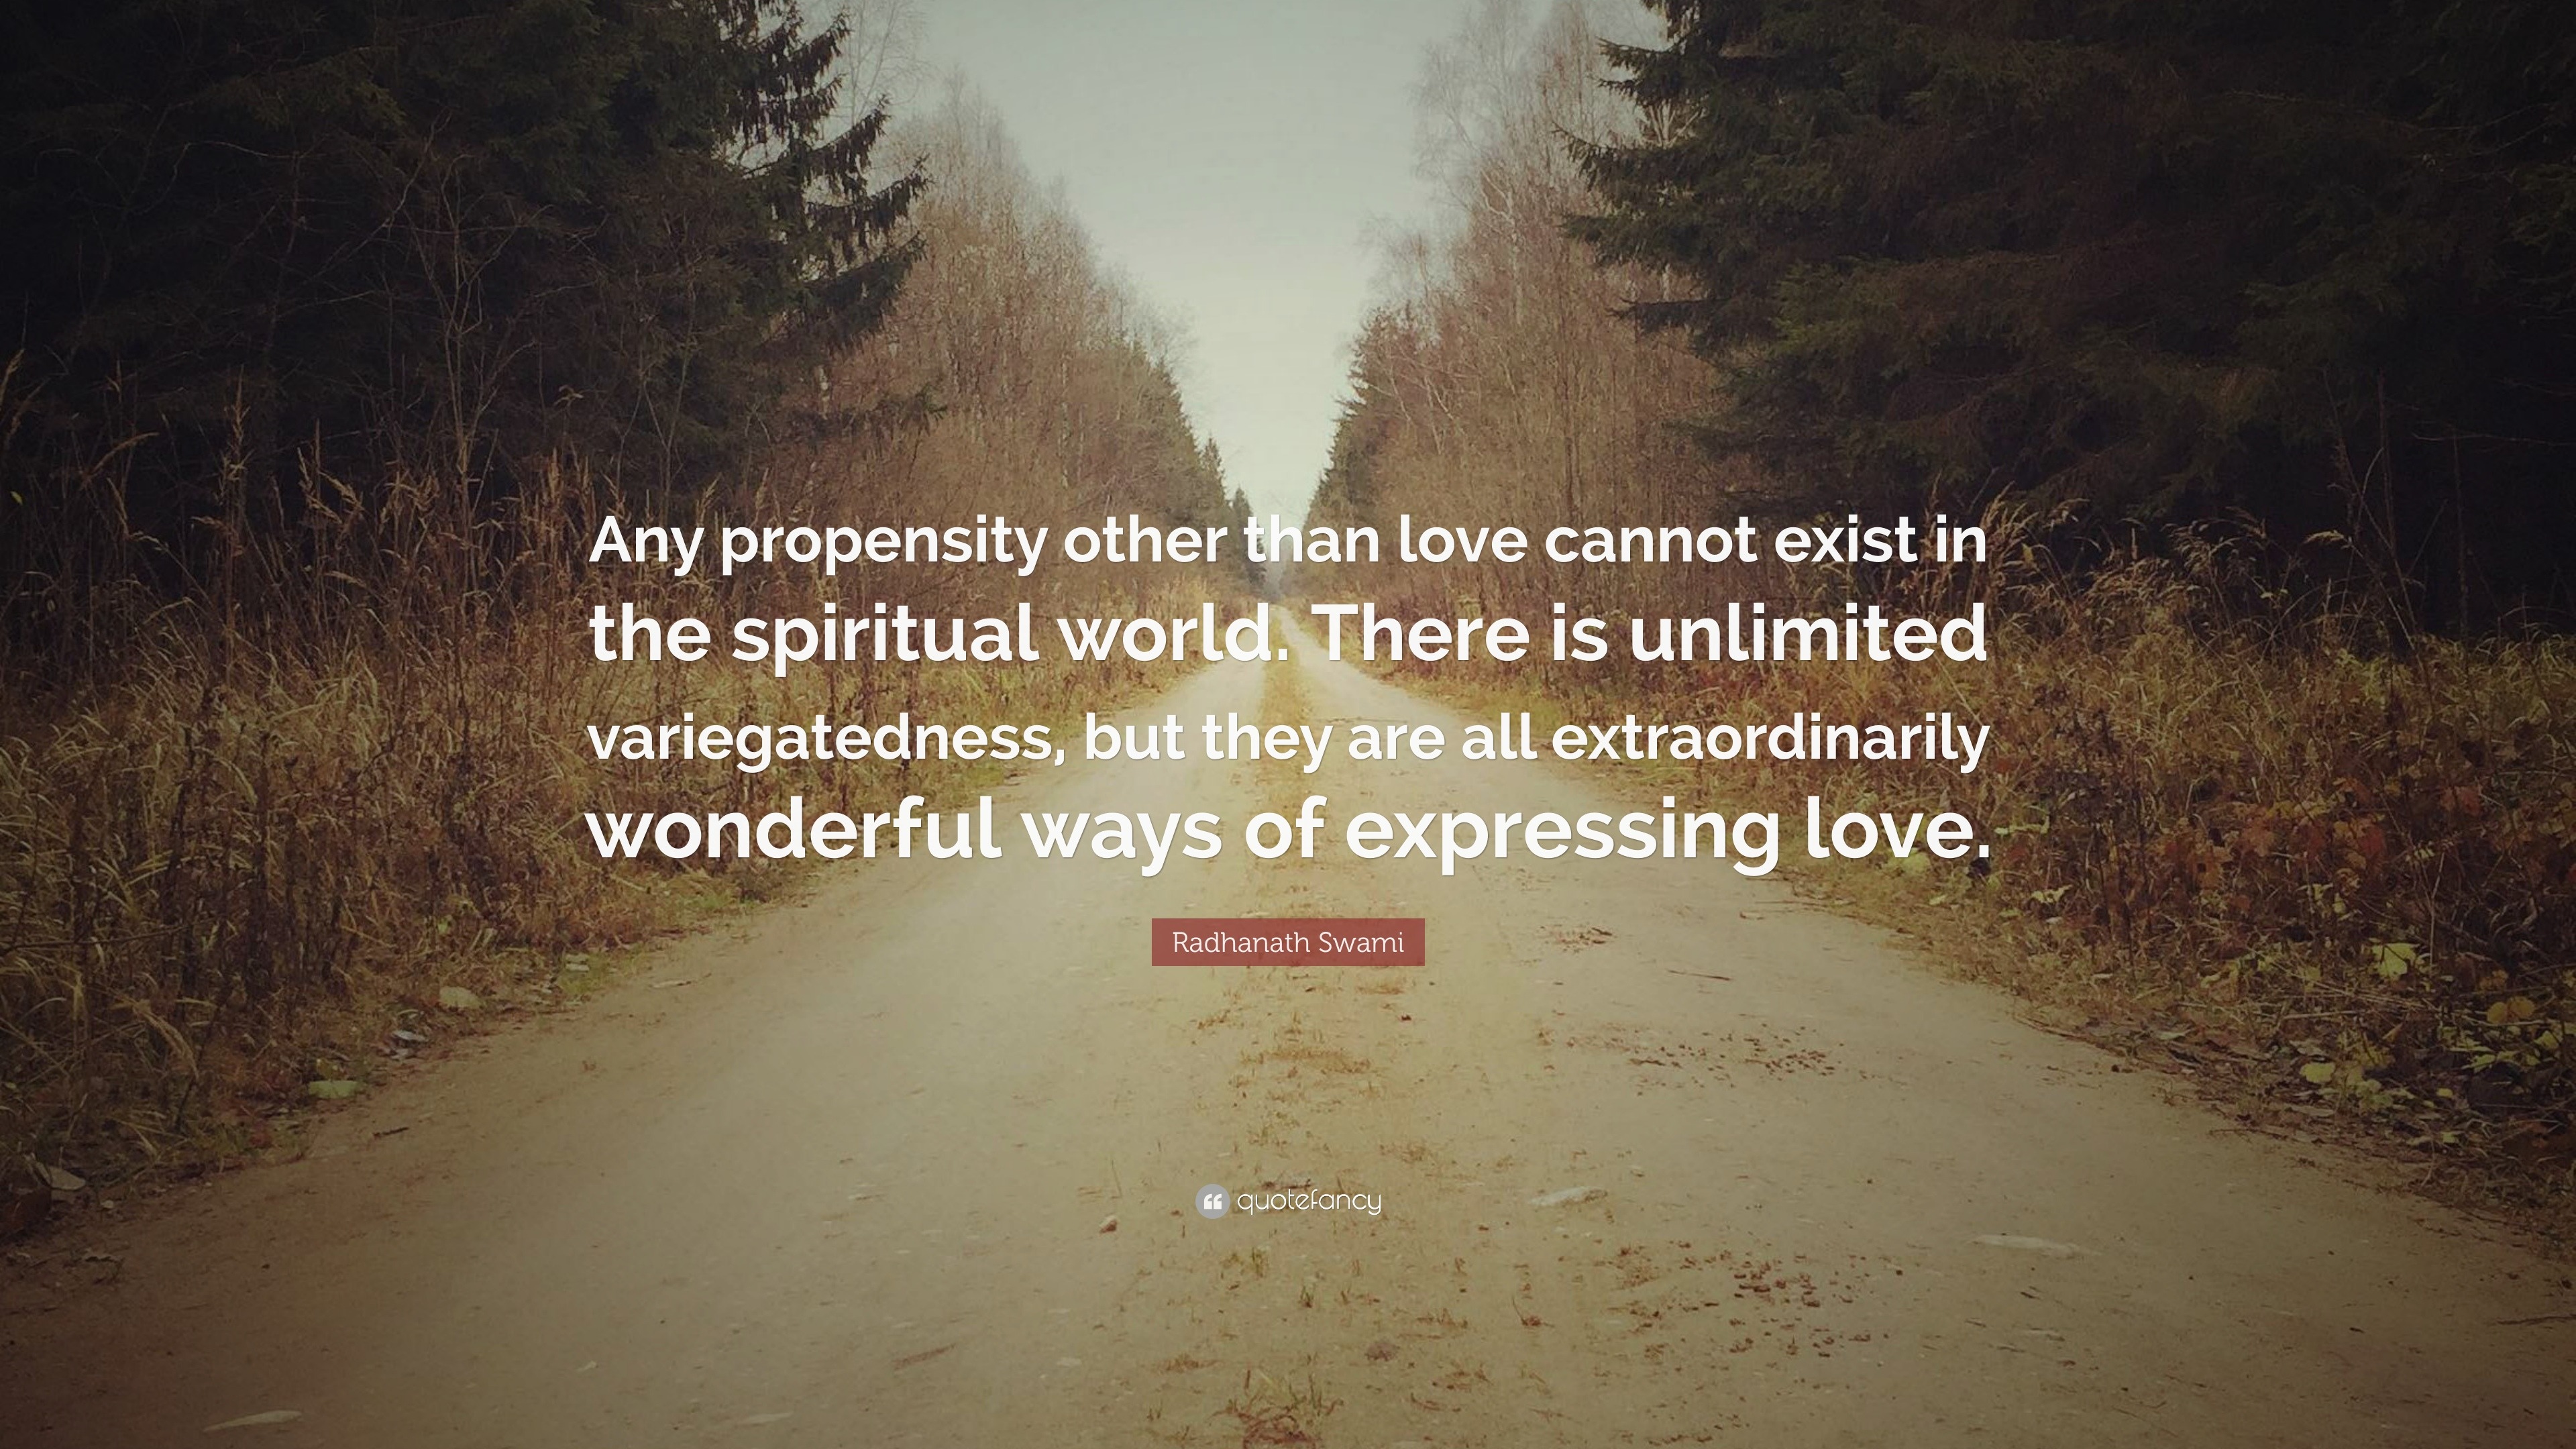 Radhanath Swami Quote: "Any propensity other than love cannot exist in the spiritual world ...